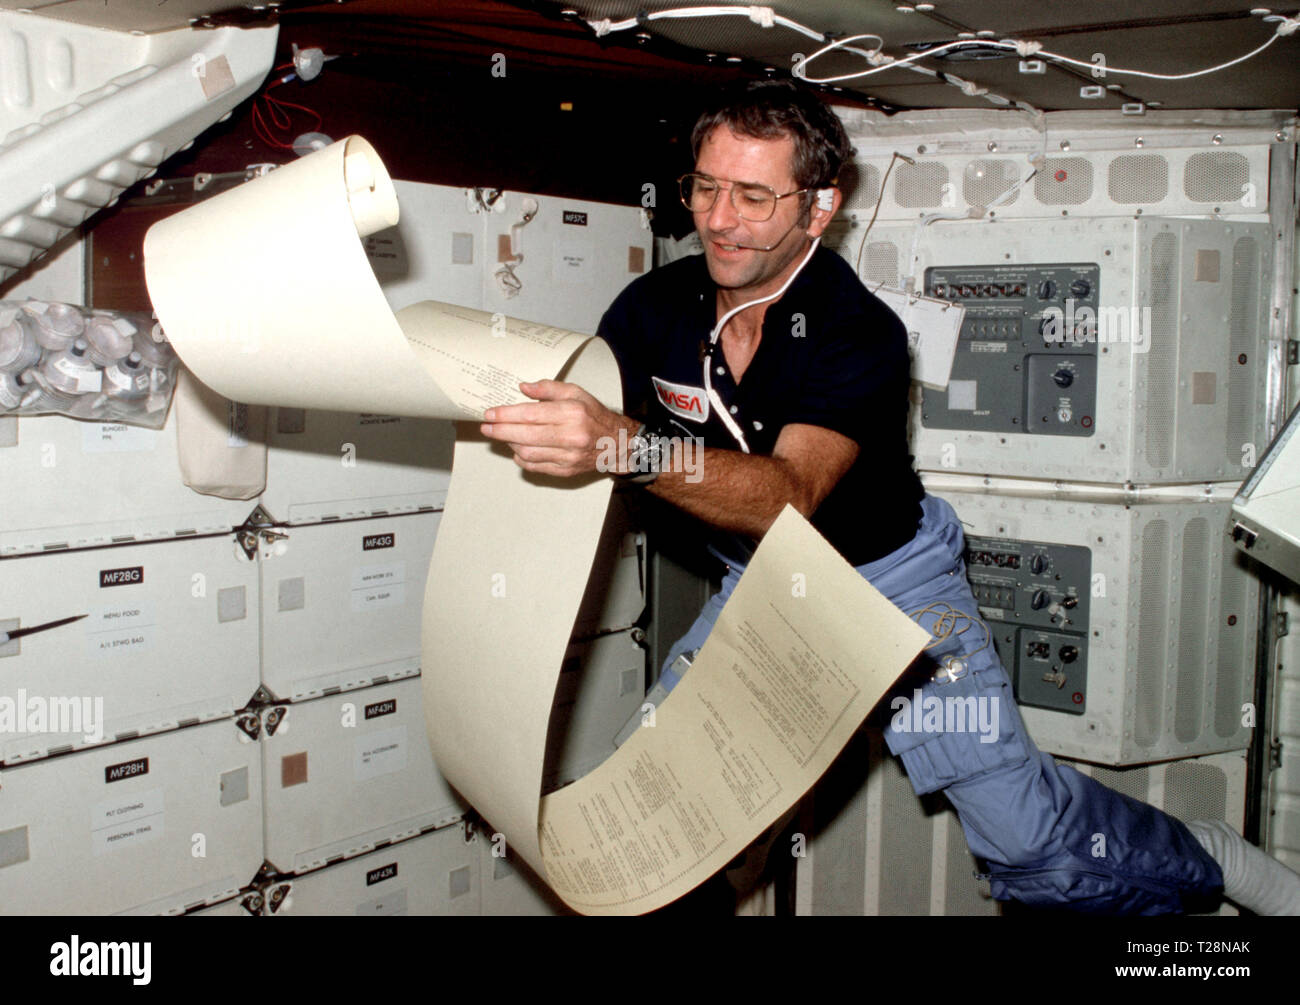 (12-14 Nov. 1981) --- Astronaut Richard H. Truly, STS-2 pilot, peruses some teleprinter copy, floating partially about the middeck area of NASA’s space shuttle Columbia during one of 1,813 minutes of activity of STS-2. This photograph was recorded with 35mm camera in the hands of astronaut Joe H. Engle, STS-2 crew commander. Truly communicates with spacecraft communicators on the ground. Photo credit: NASA Stock Photo